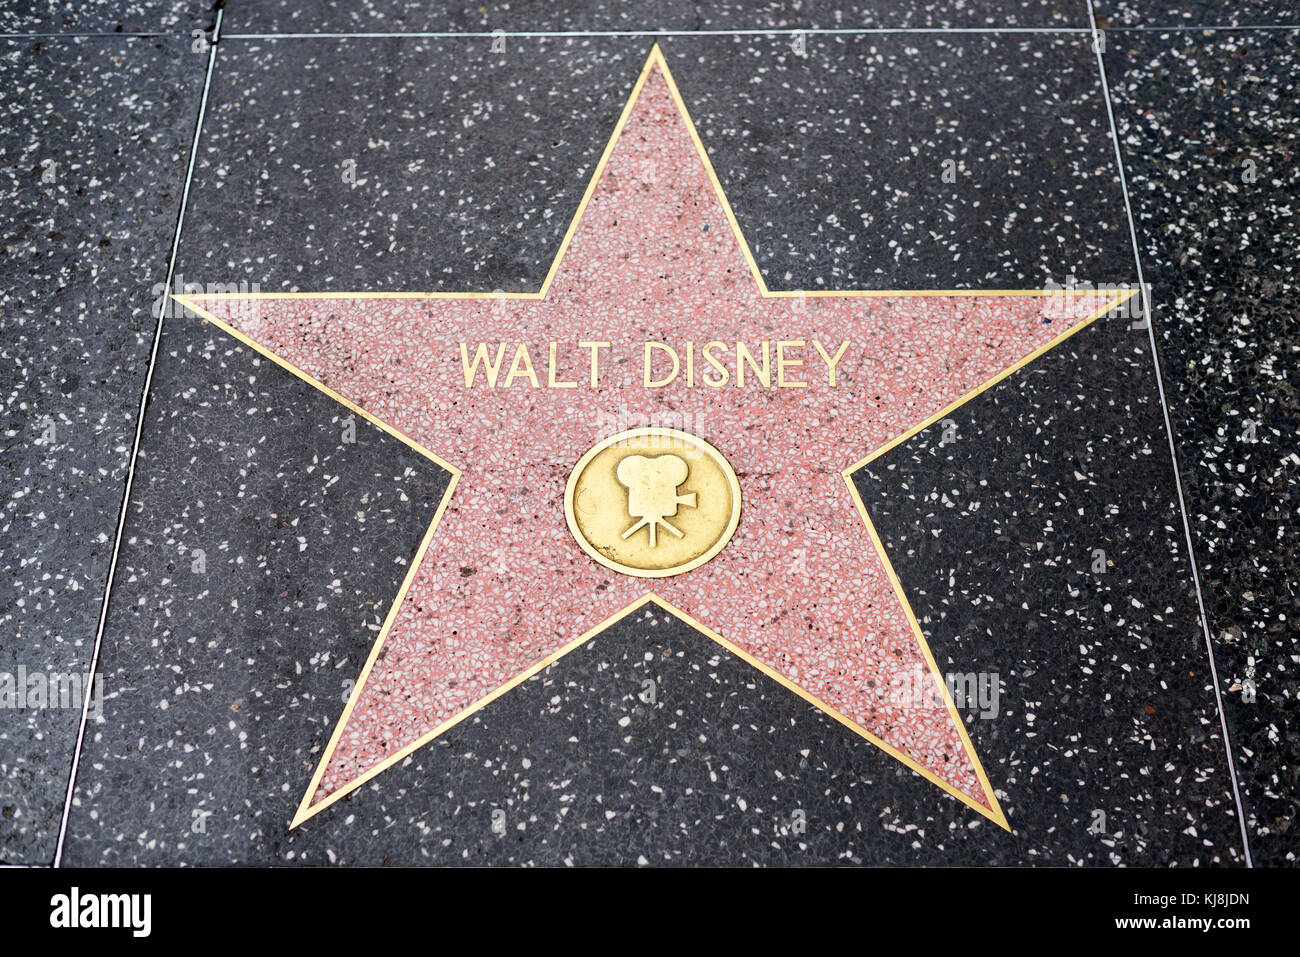 HOLLYWOOD, CA - DECEMBER 06: Walt Disney star on the Hollywood Walk of Fame in Hollywood, California on Dec. 6, 2016. Stock Photo